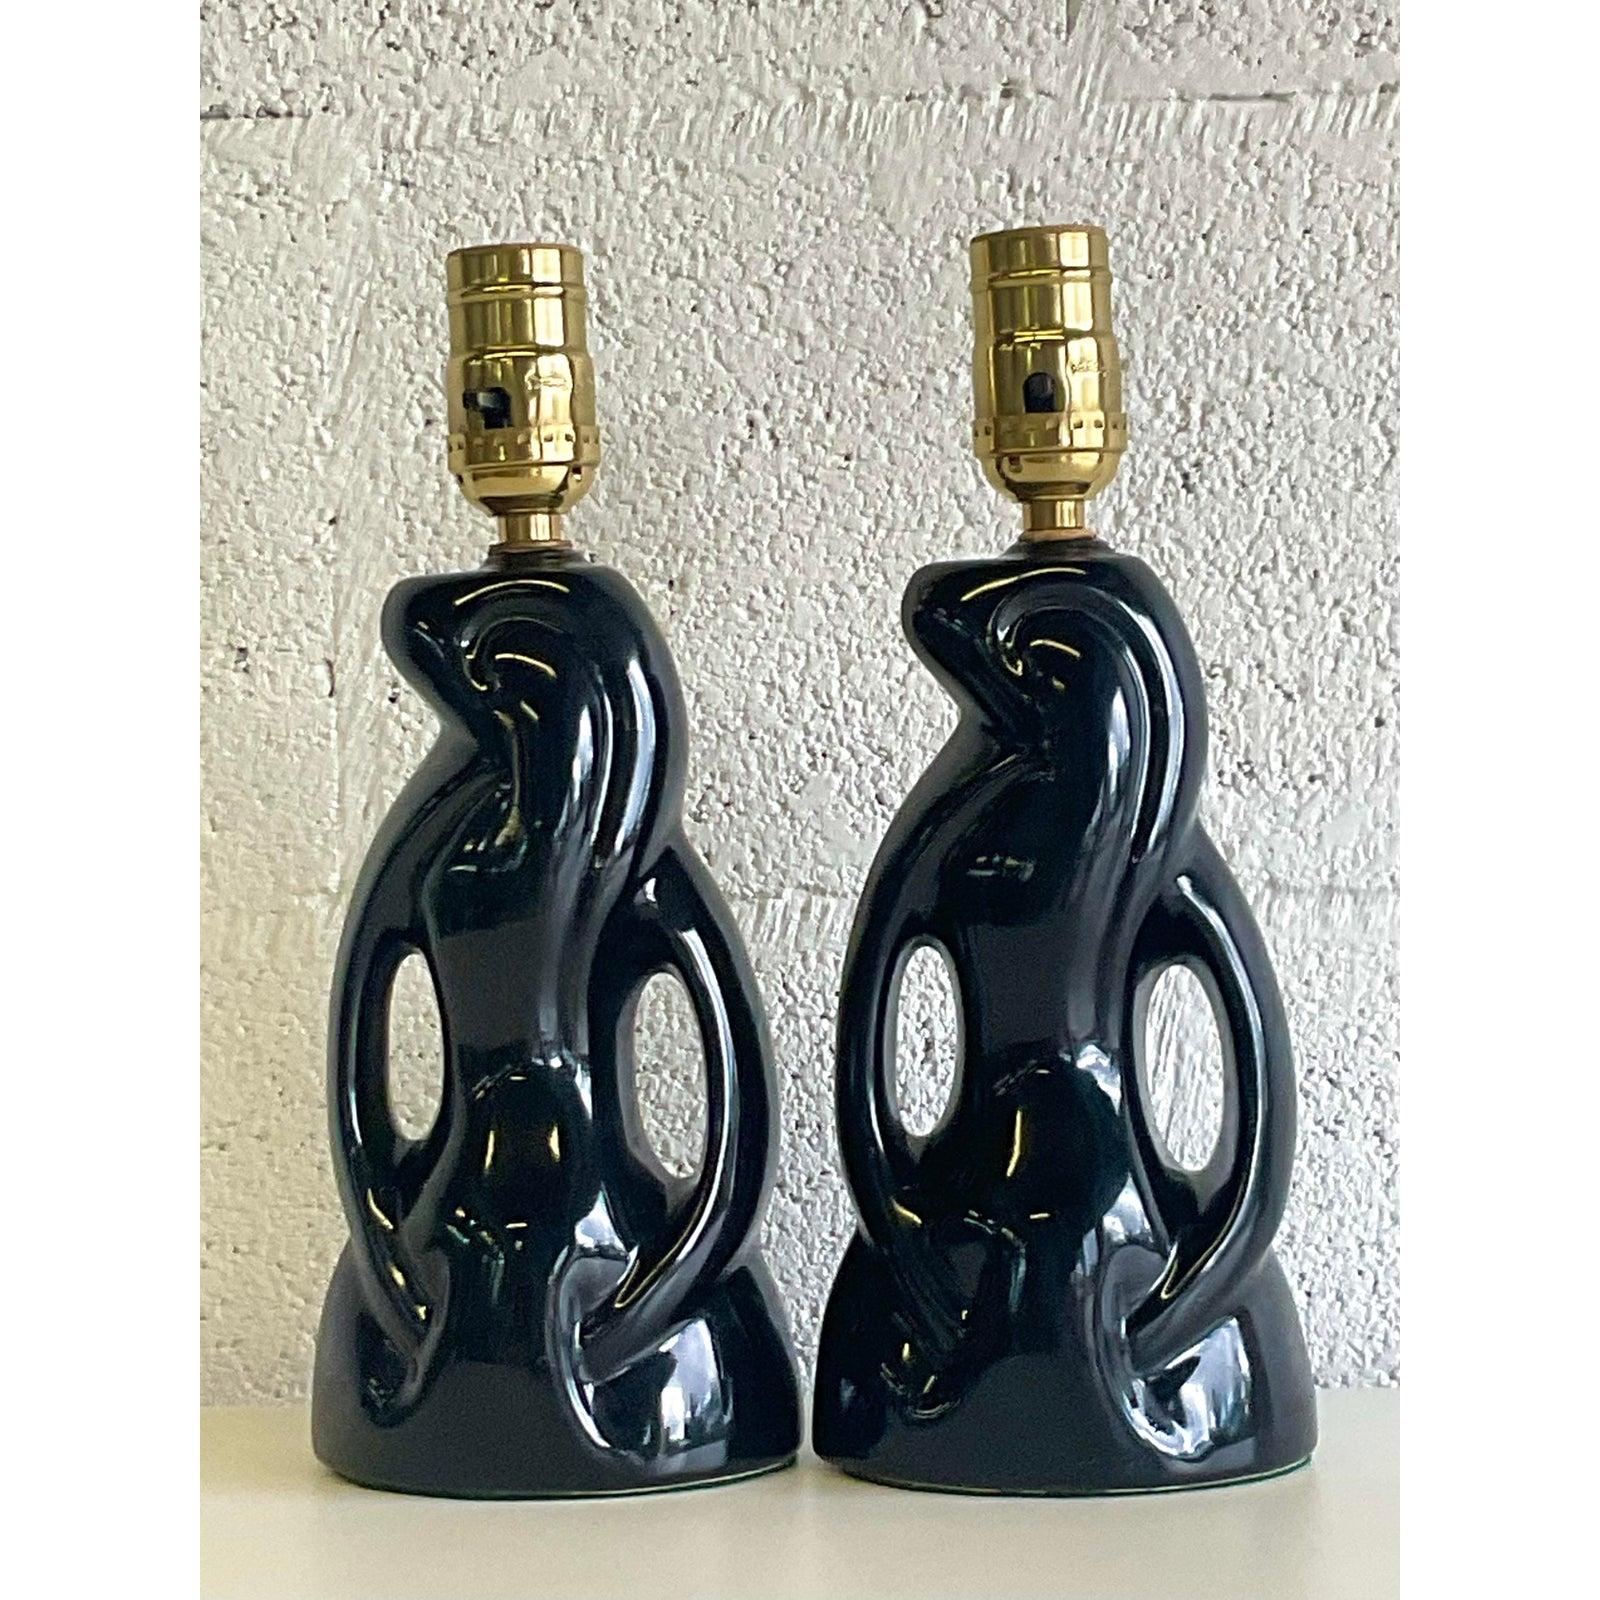 Midcentury Abstract Black Glazed Ceramic Boudoir Lamps - A Pair For Sale 3